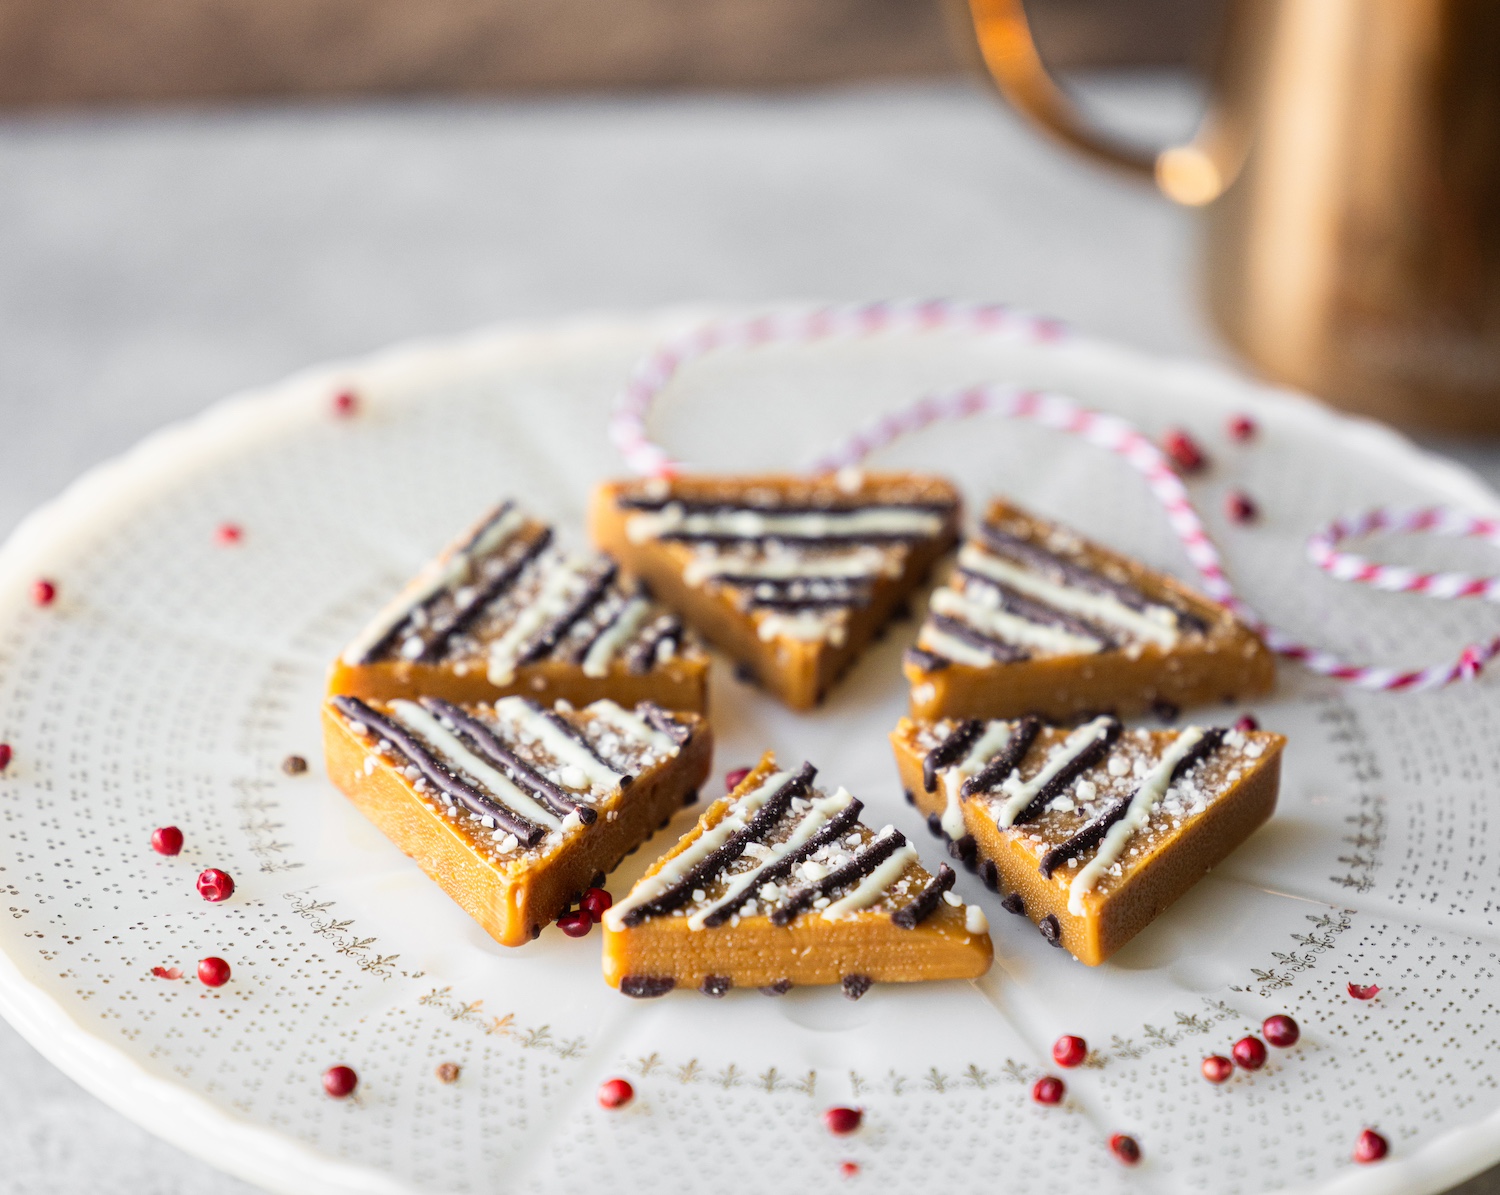 Why Cache Toffee is the Perfect Neighbor Gift for the Holidays